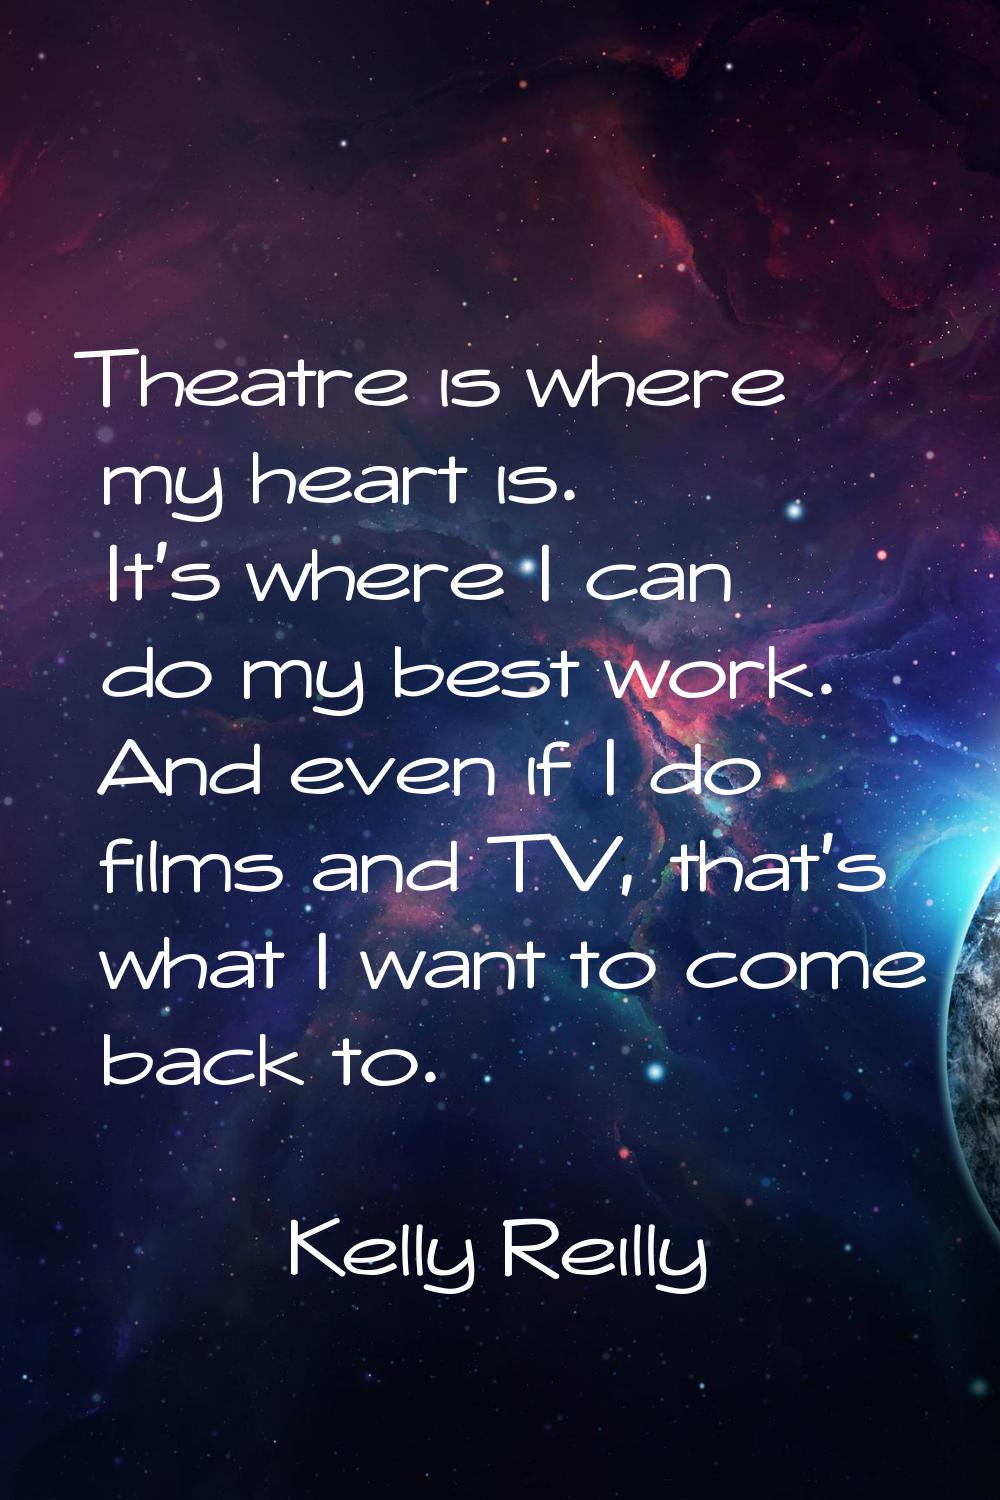 Theatre is where my heart is. It's where I can do my best work. And even if I do films and TV, that